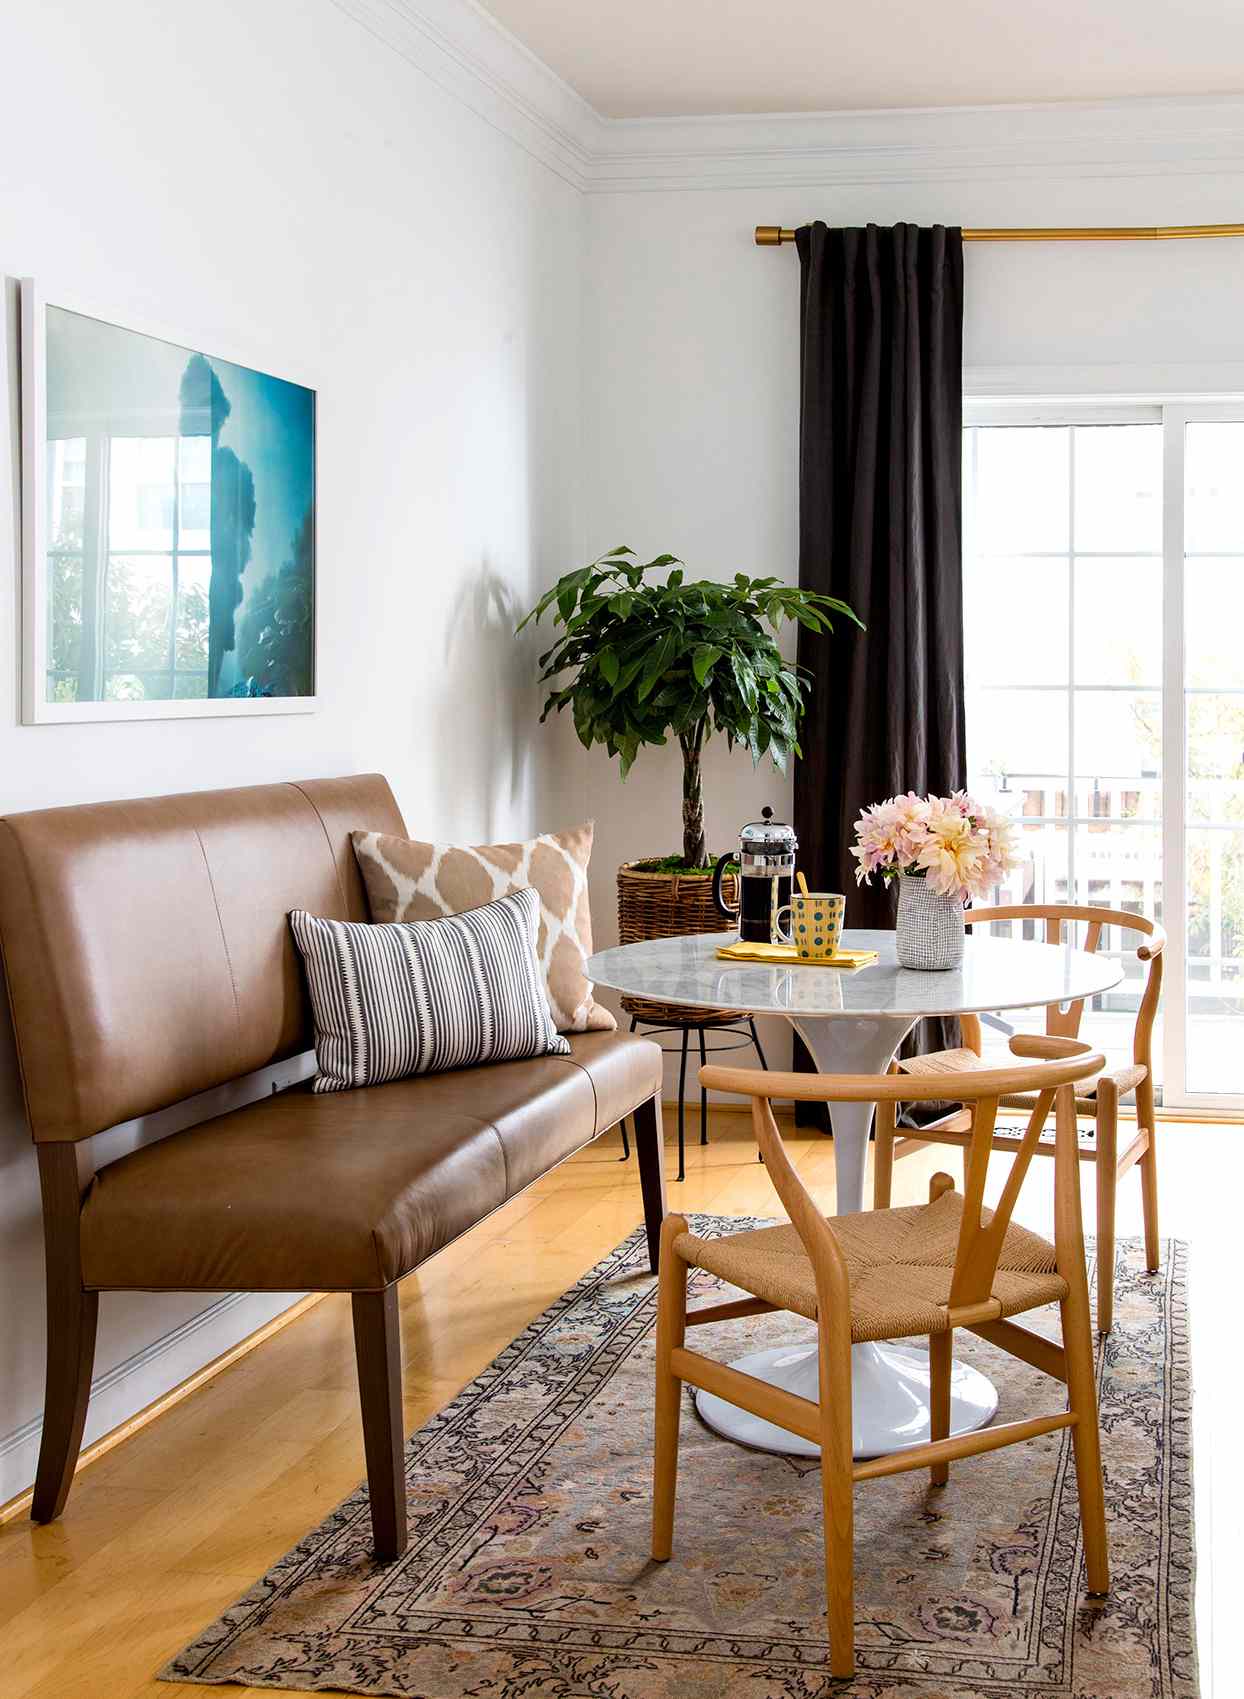 15 Small Dining Room Ideas To Make The, Dining Room Tables For Small Apartments